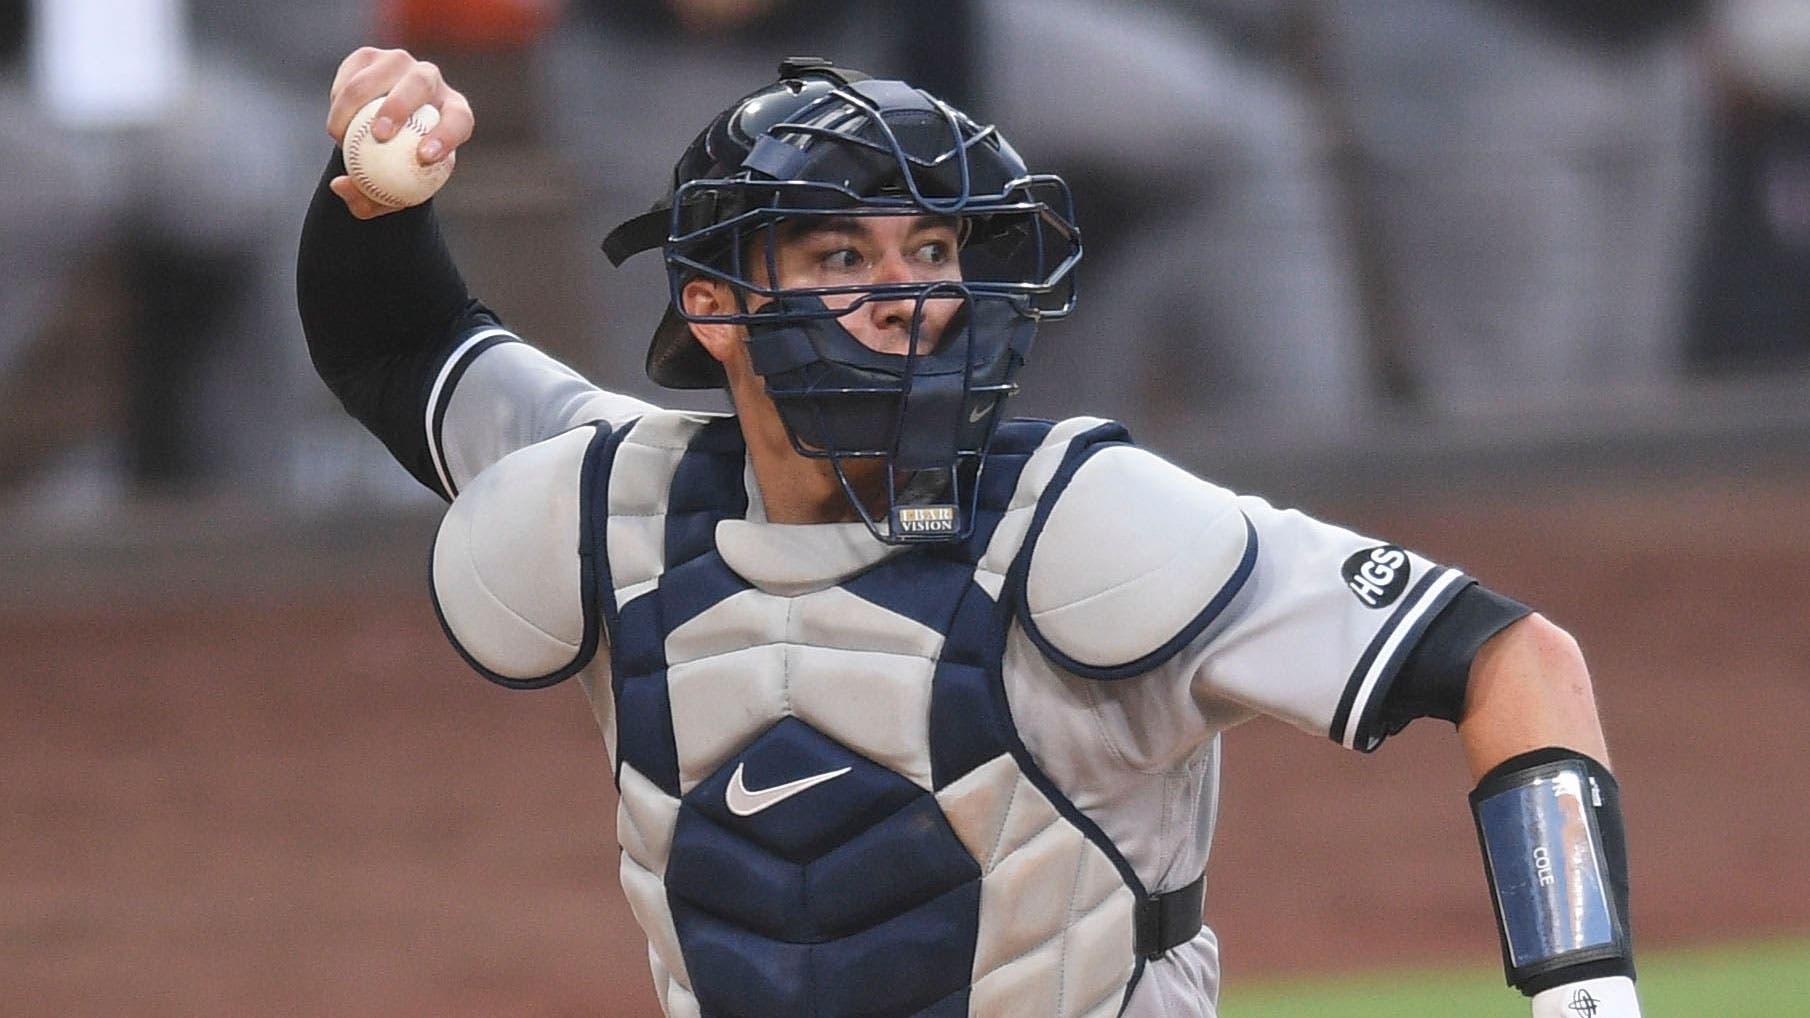 Oct 5, 2020; San Diego, California, USA; New York Yankees catcher Kyle Higashioka (66) throws to first base for an out against Tampa Bay Rays catcher Mike Zunino (not pictured) during the third inning in game one of the 2020 ALDS at Petco Park. / Orlando Ramirez-USA TODAY Sports